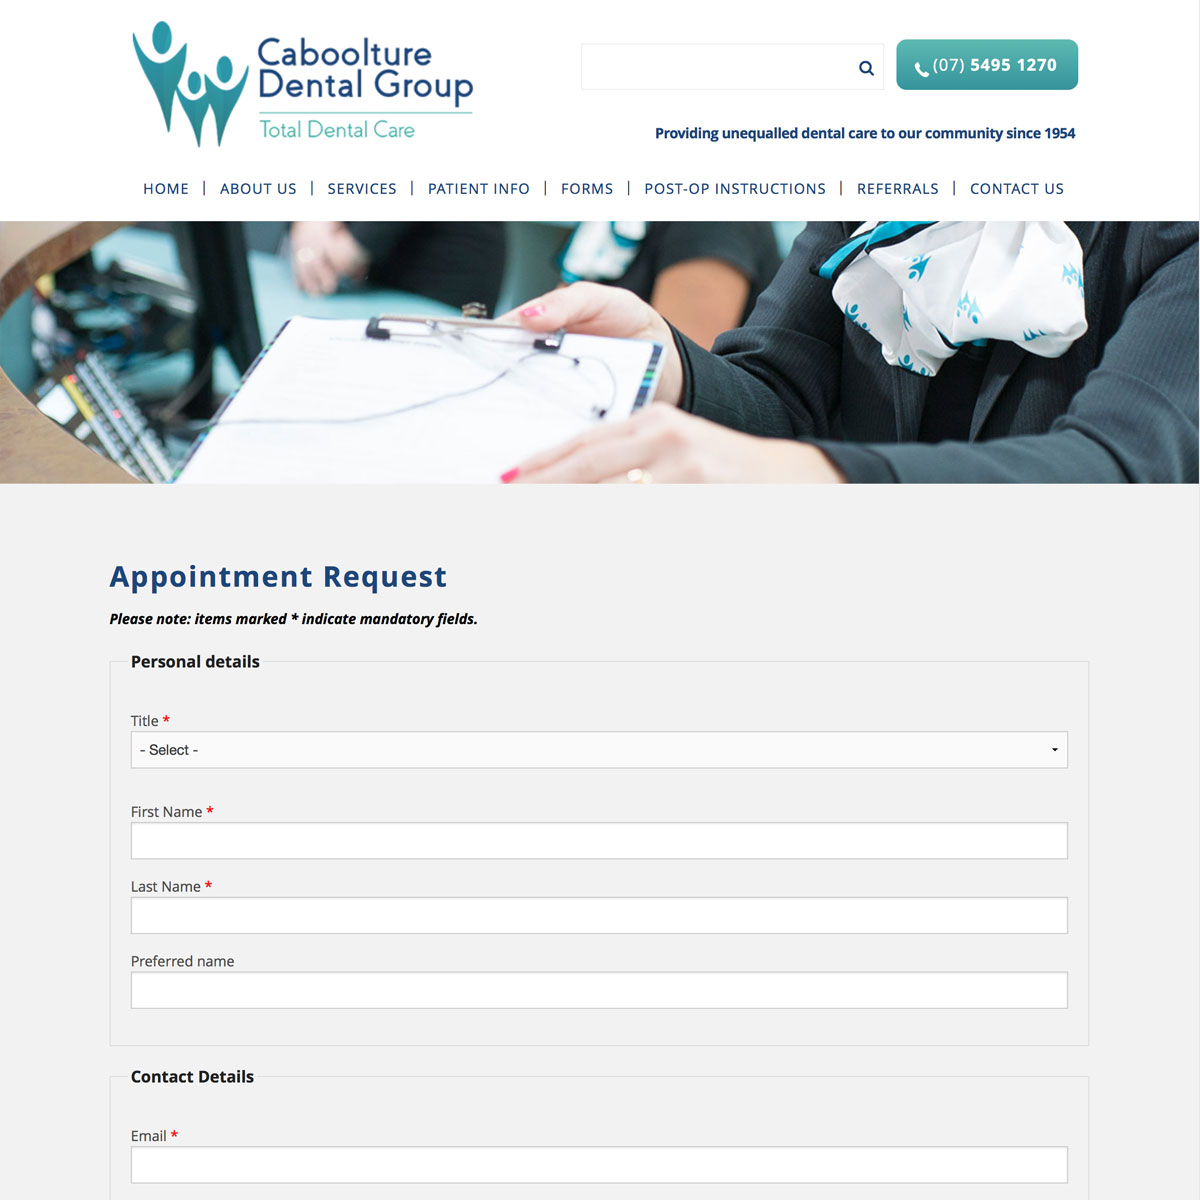 Caboolture Dental - Appointment Request